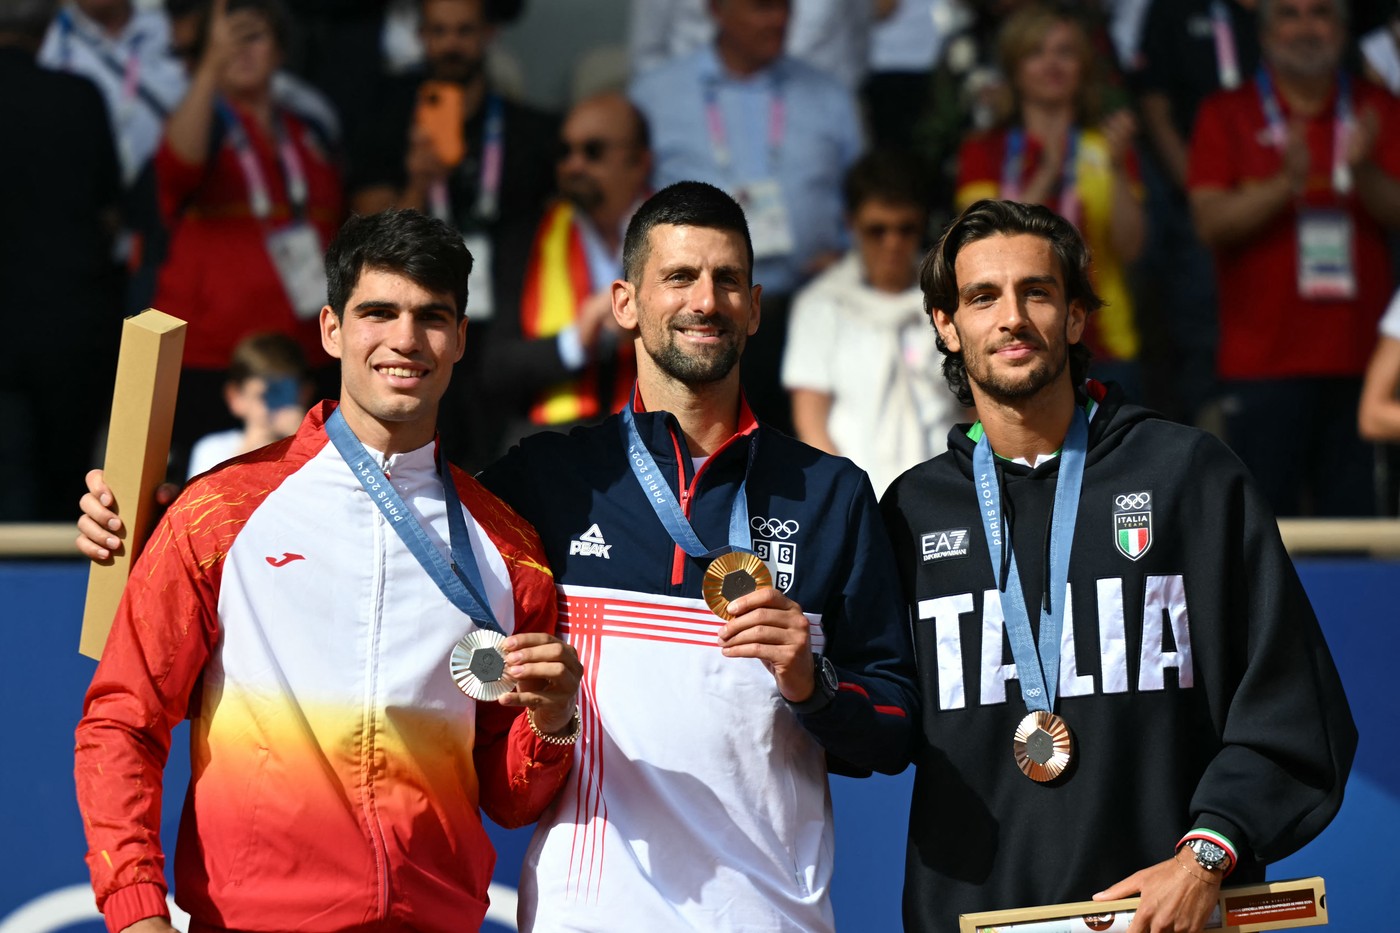 (L-R) Silver medallist Spain's Carlos Alcaraz, gold medallist, Serbia's Novak Djokovic and bronze medallist Italy's Lorenzo Musetti pose with their medals on the podium at the presentation ceremony for the men's singles tennis event on Court Philippe-Chatrier at the Roland-Garros Stadium during the Paris 2024 Olympic Games, in Paris on August 4, 2024.,Image: 895910022, License: Rights-managed, Restrictions: , Model Release: no